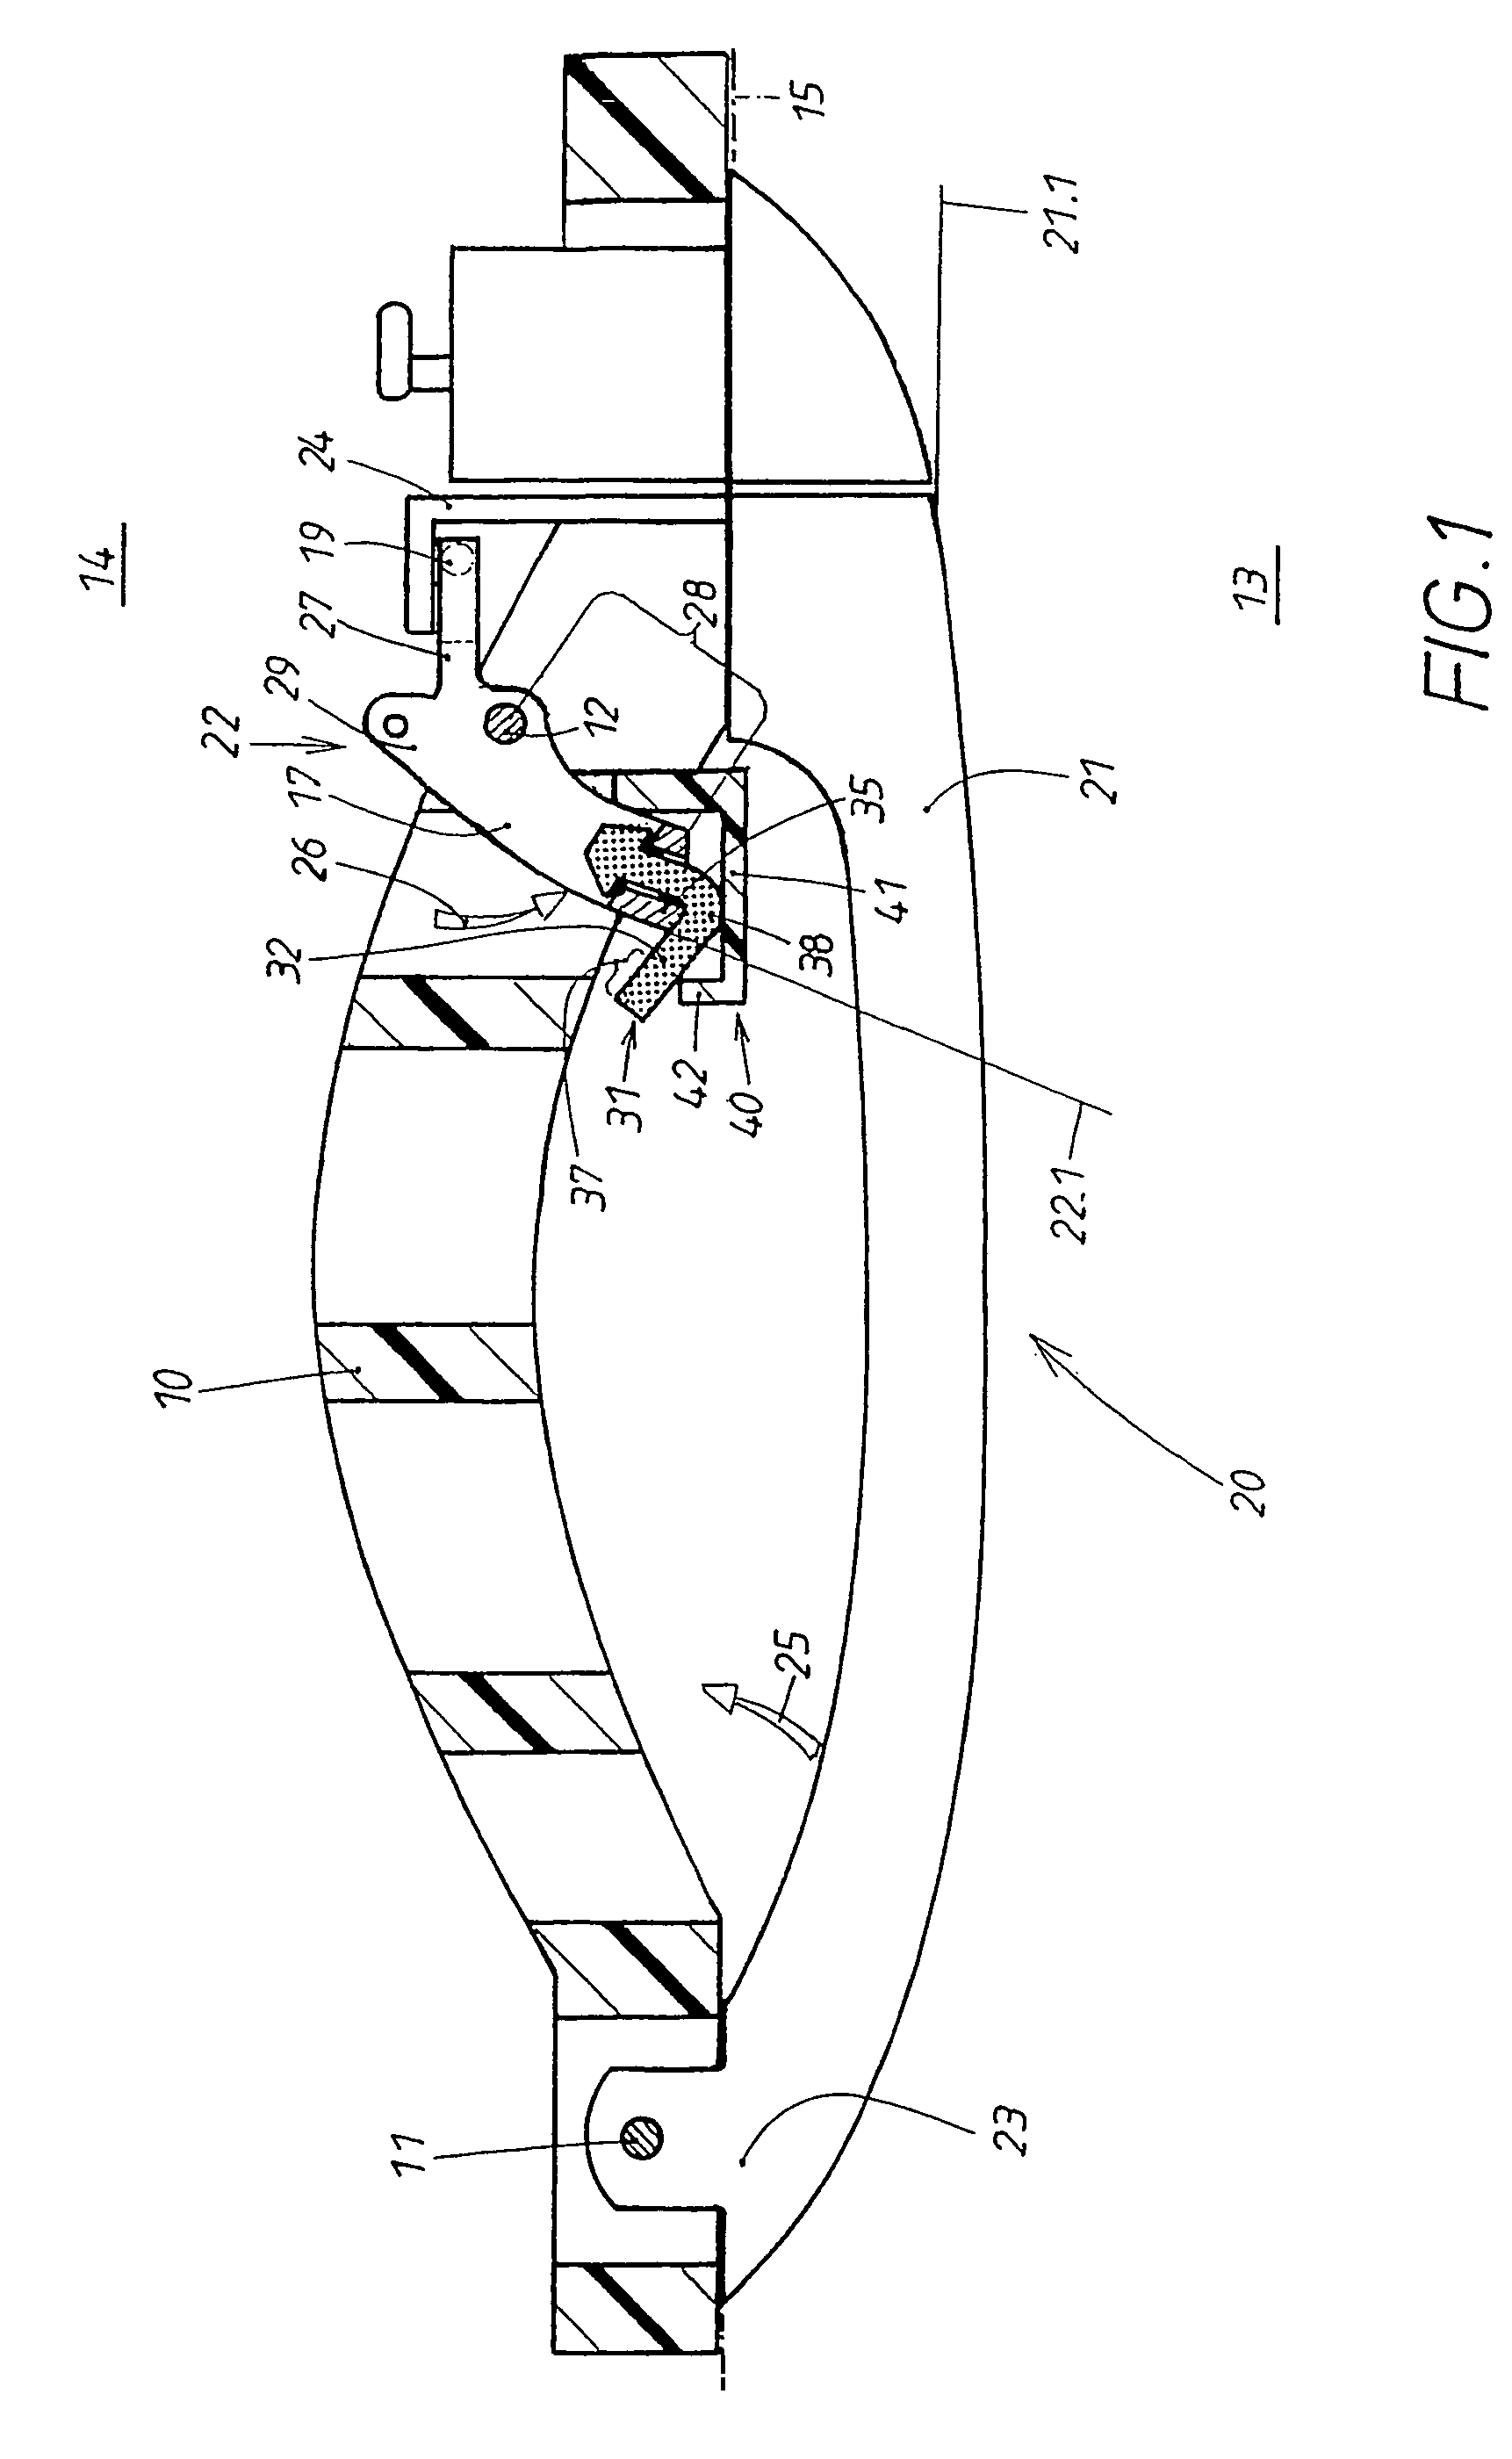 Device for operating locks on doors or hatches of vehicles